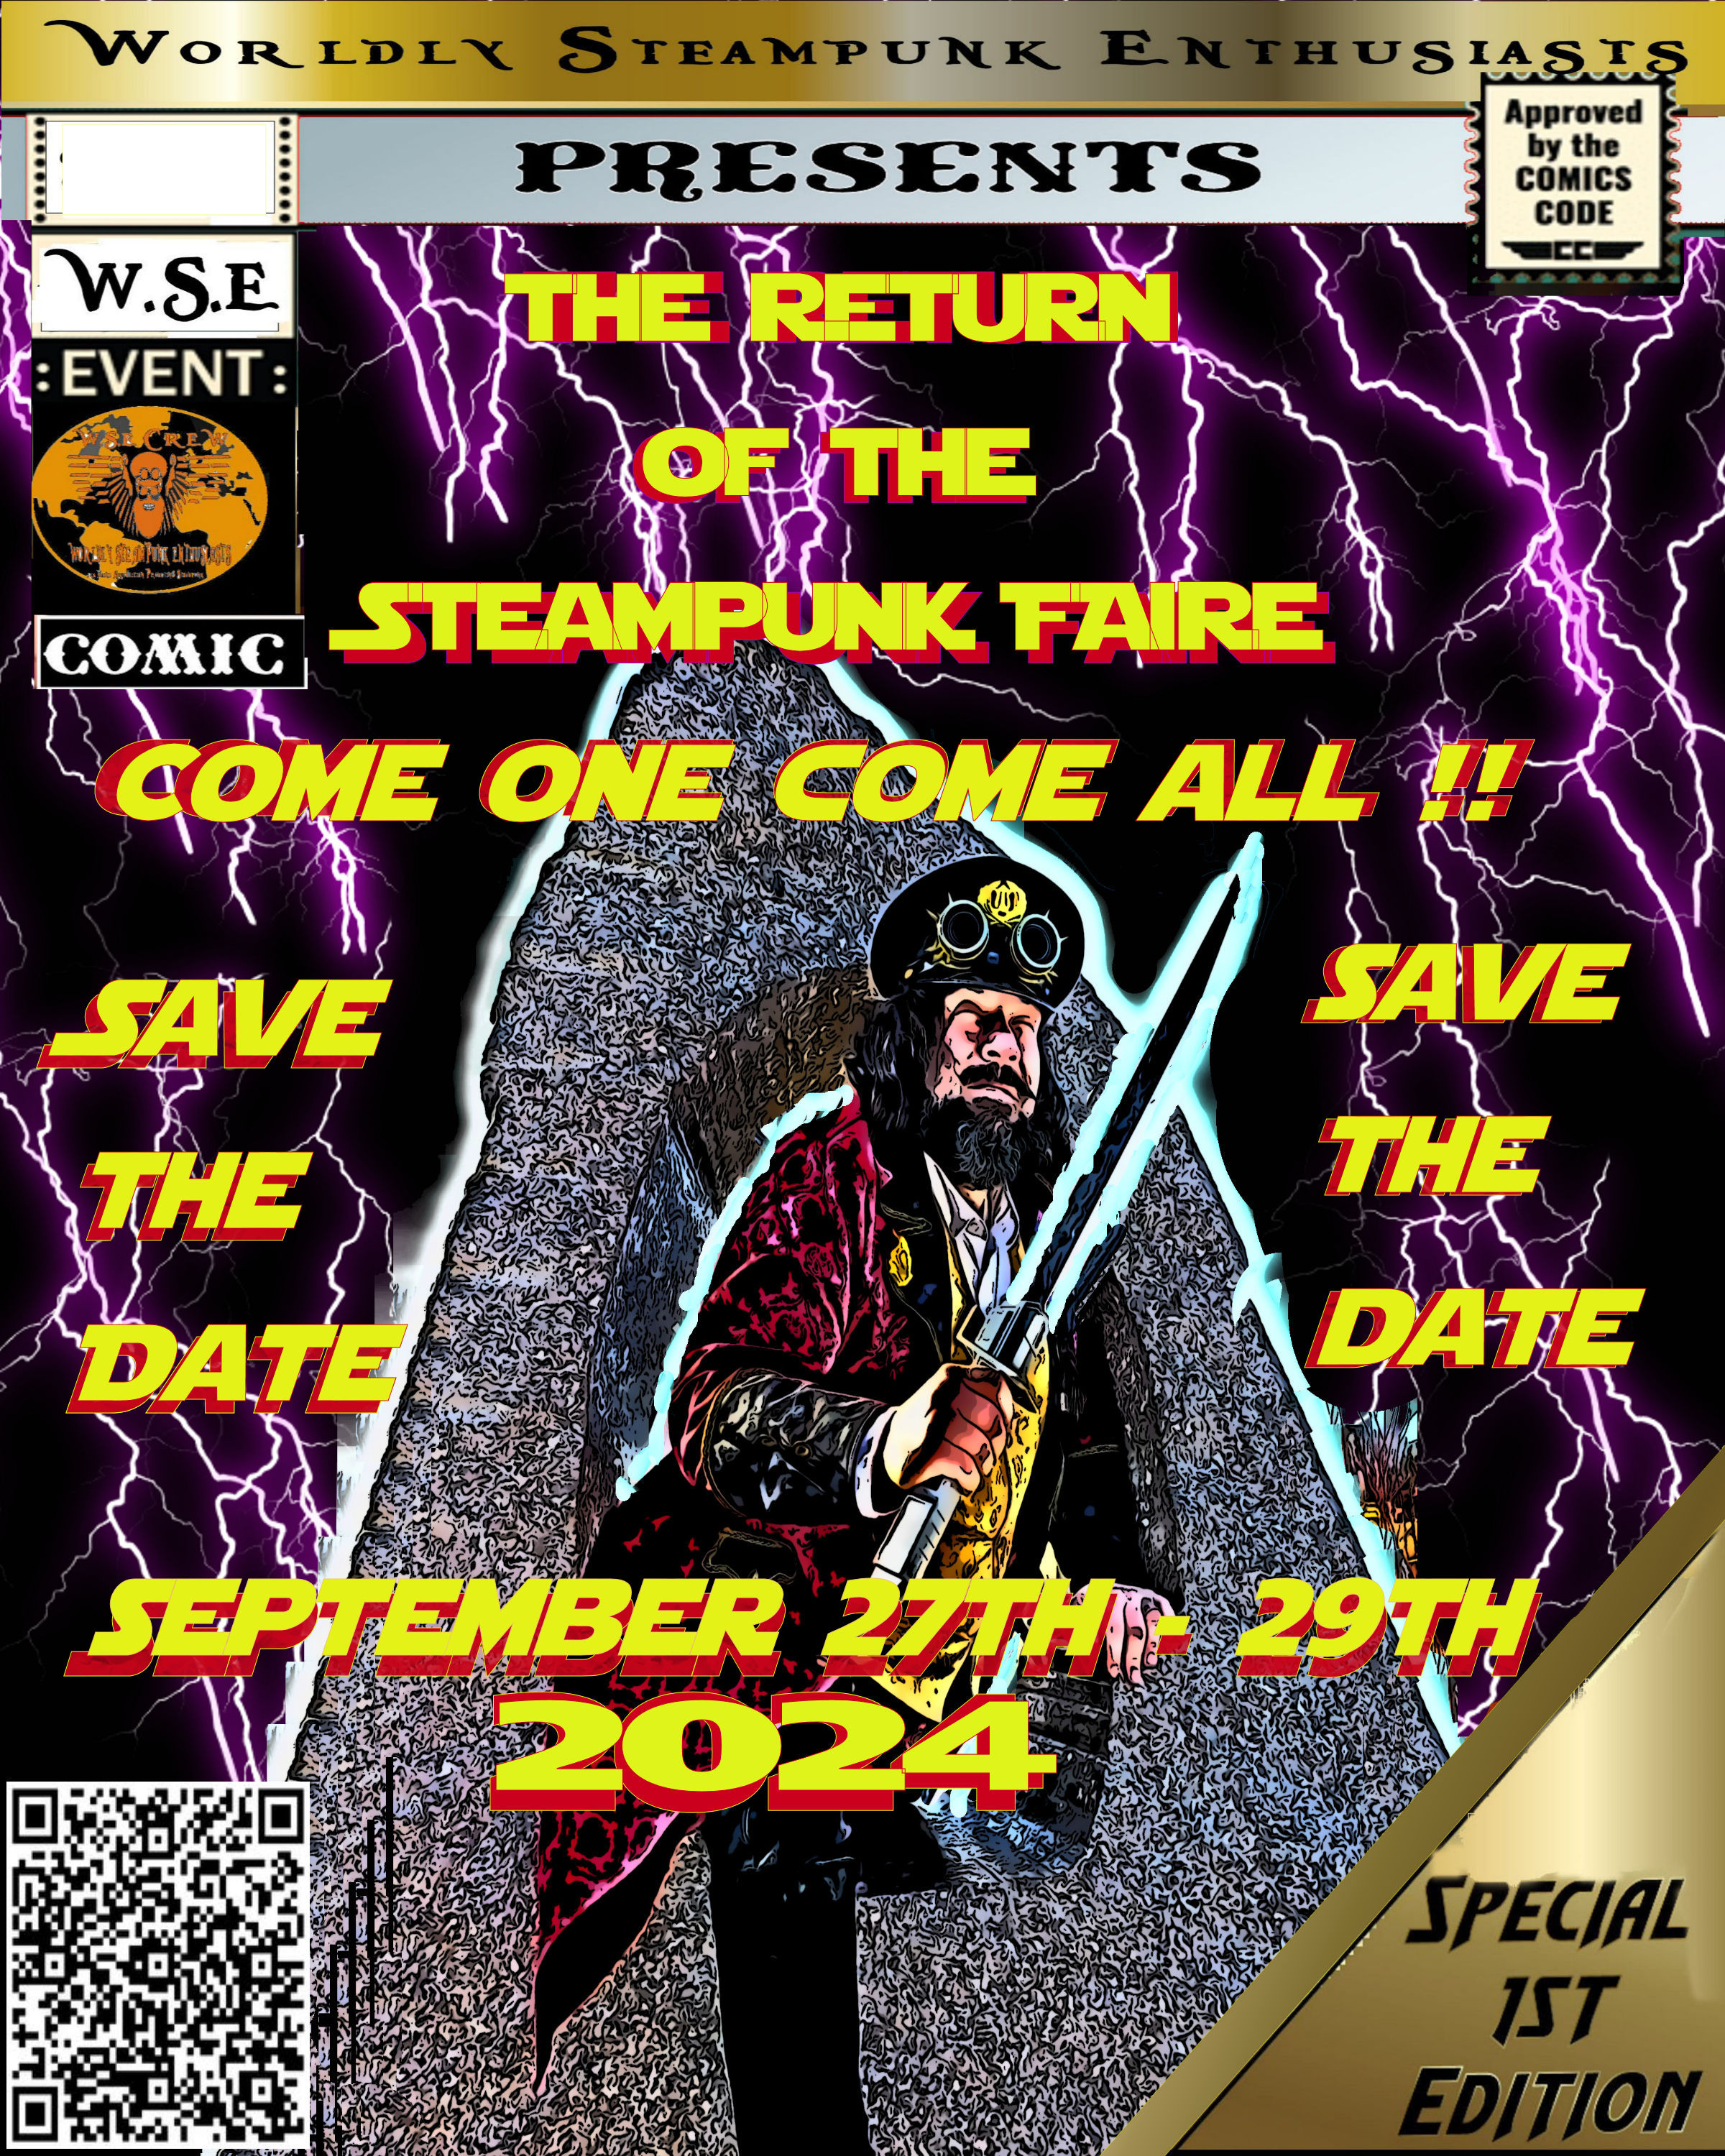 new poster3 2024 2 2 save the date